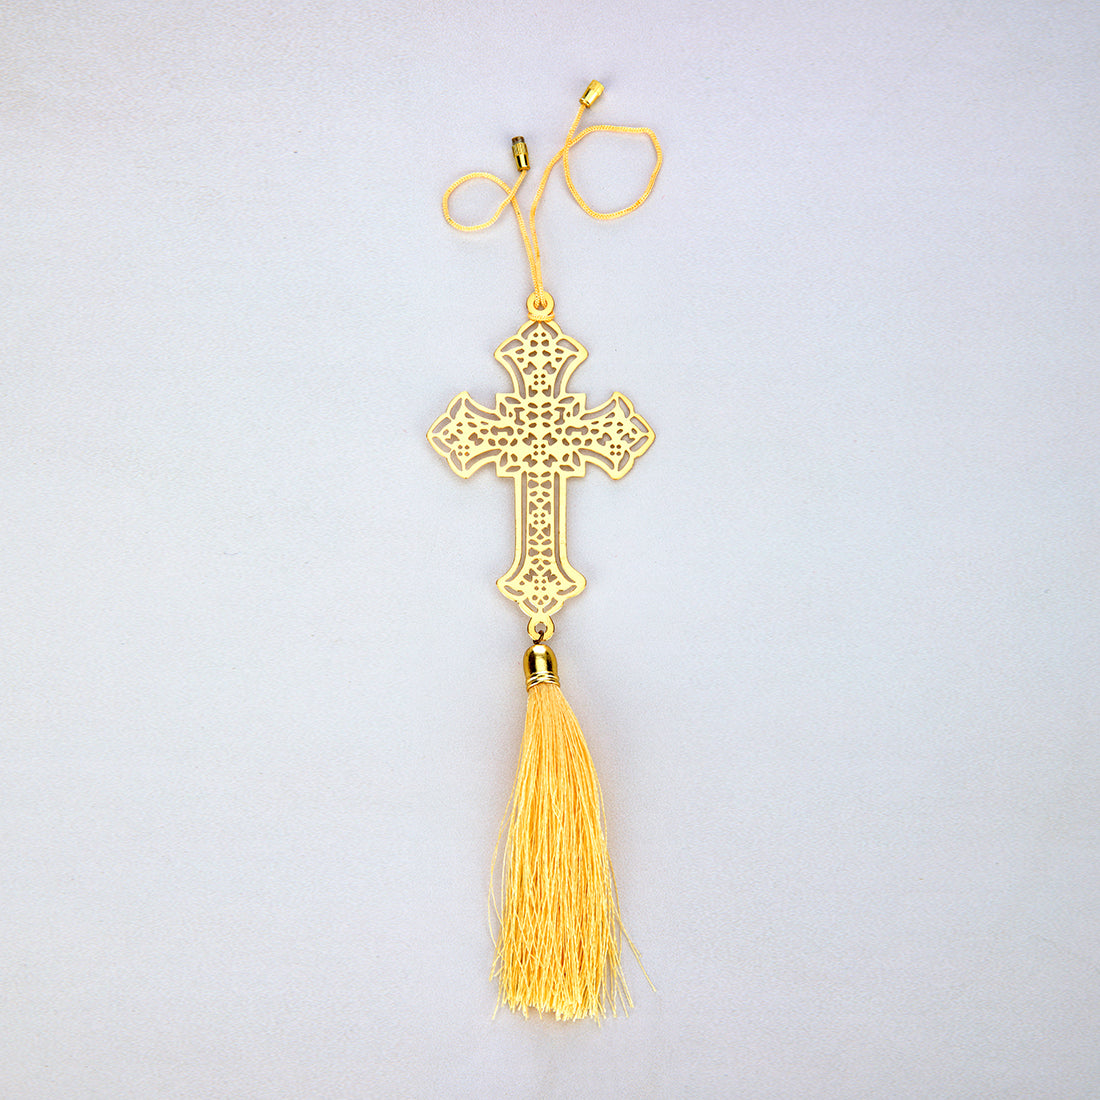 Christian Jesus Cross Hanging Accessories for Car rear view mirror Decor in Brass